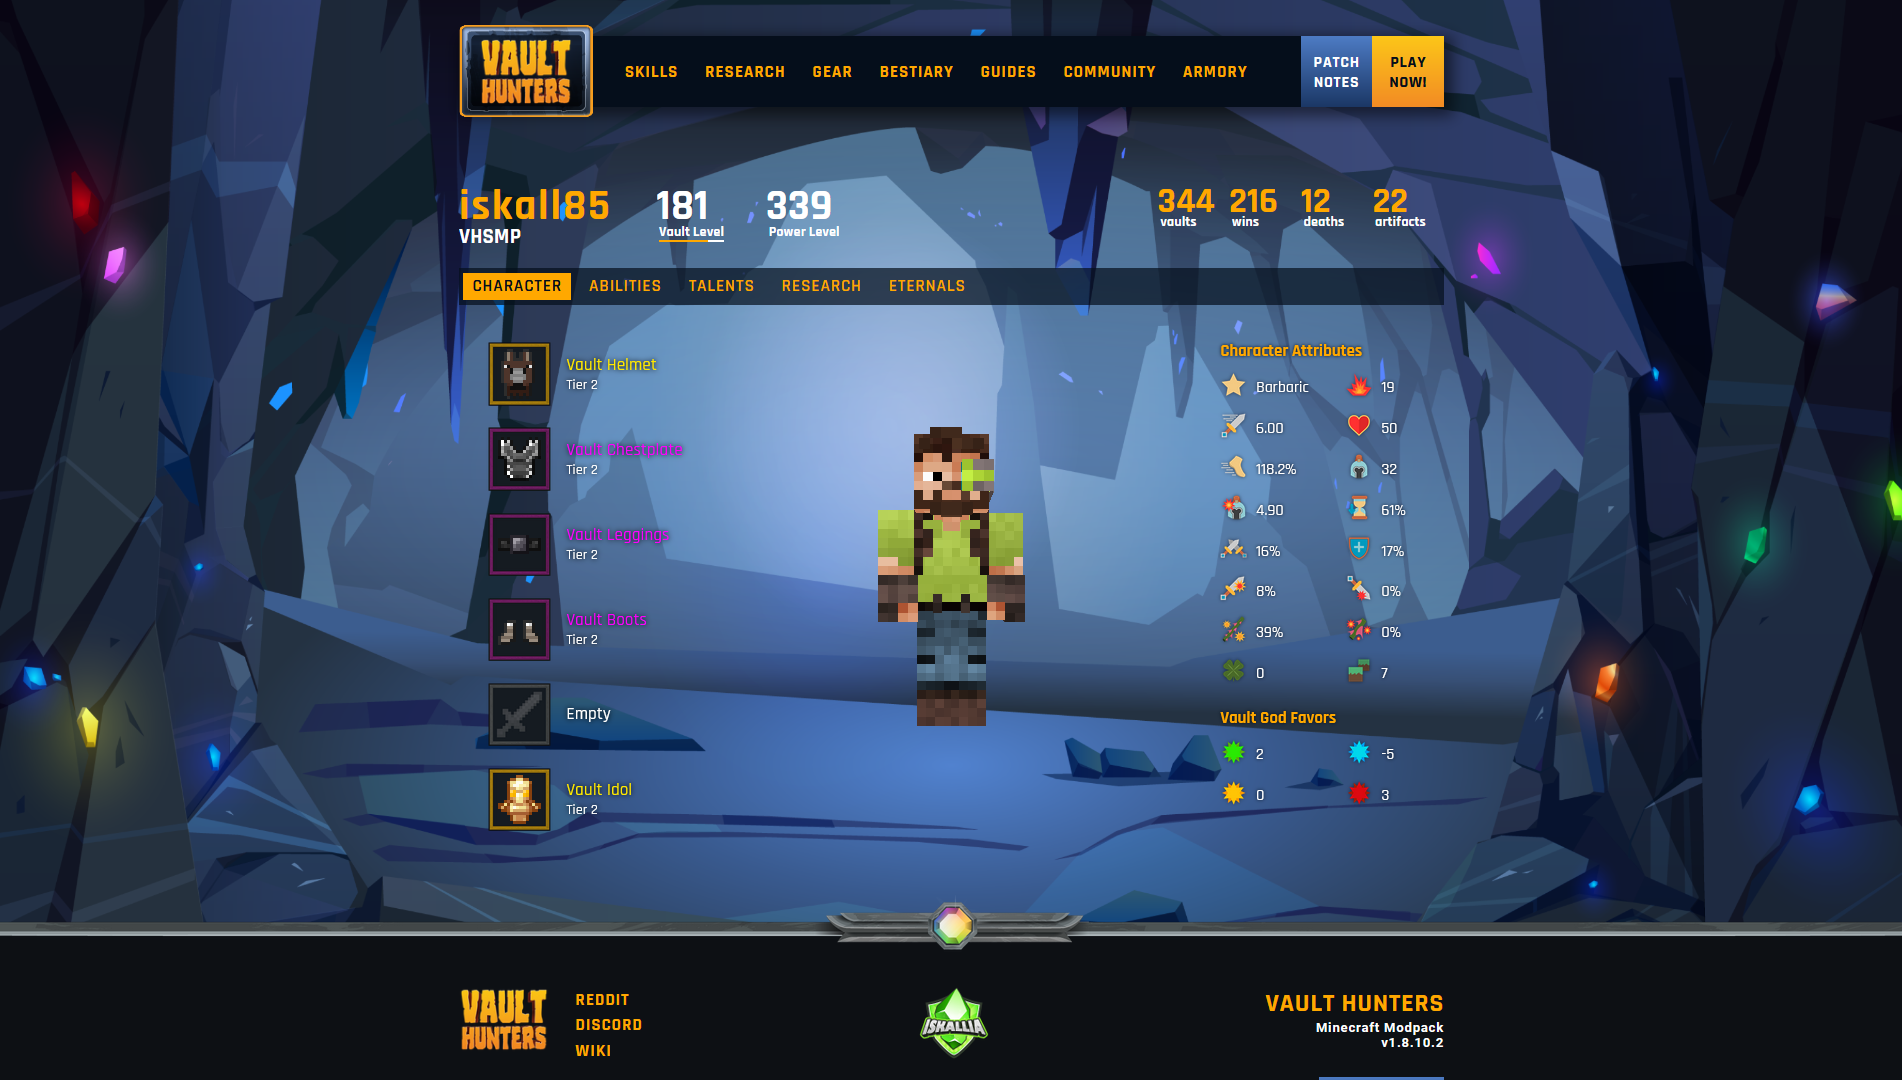 Landing page for Vault Hunters